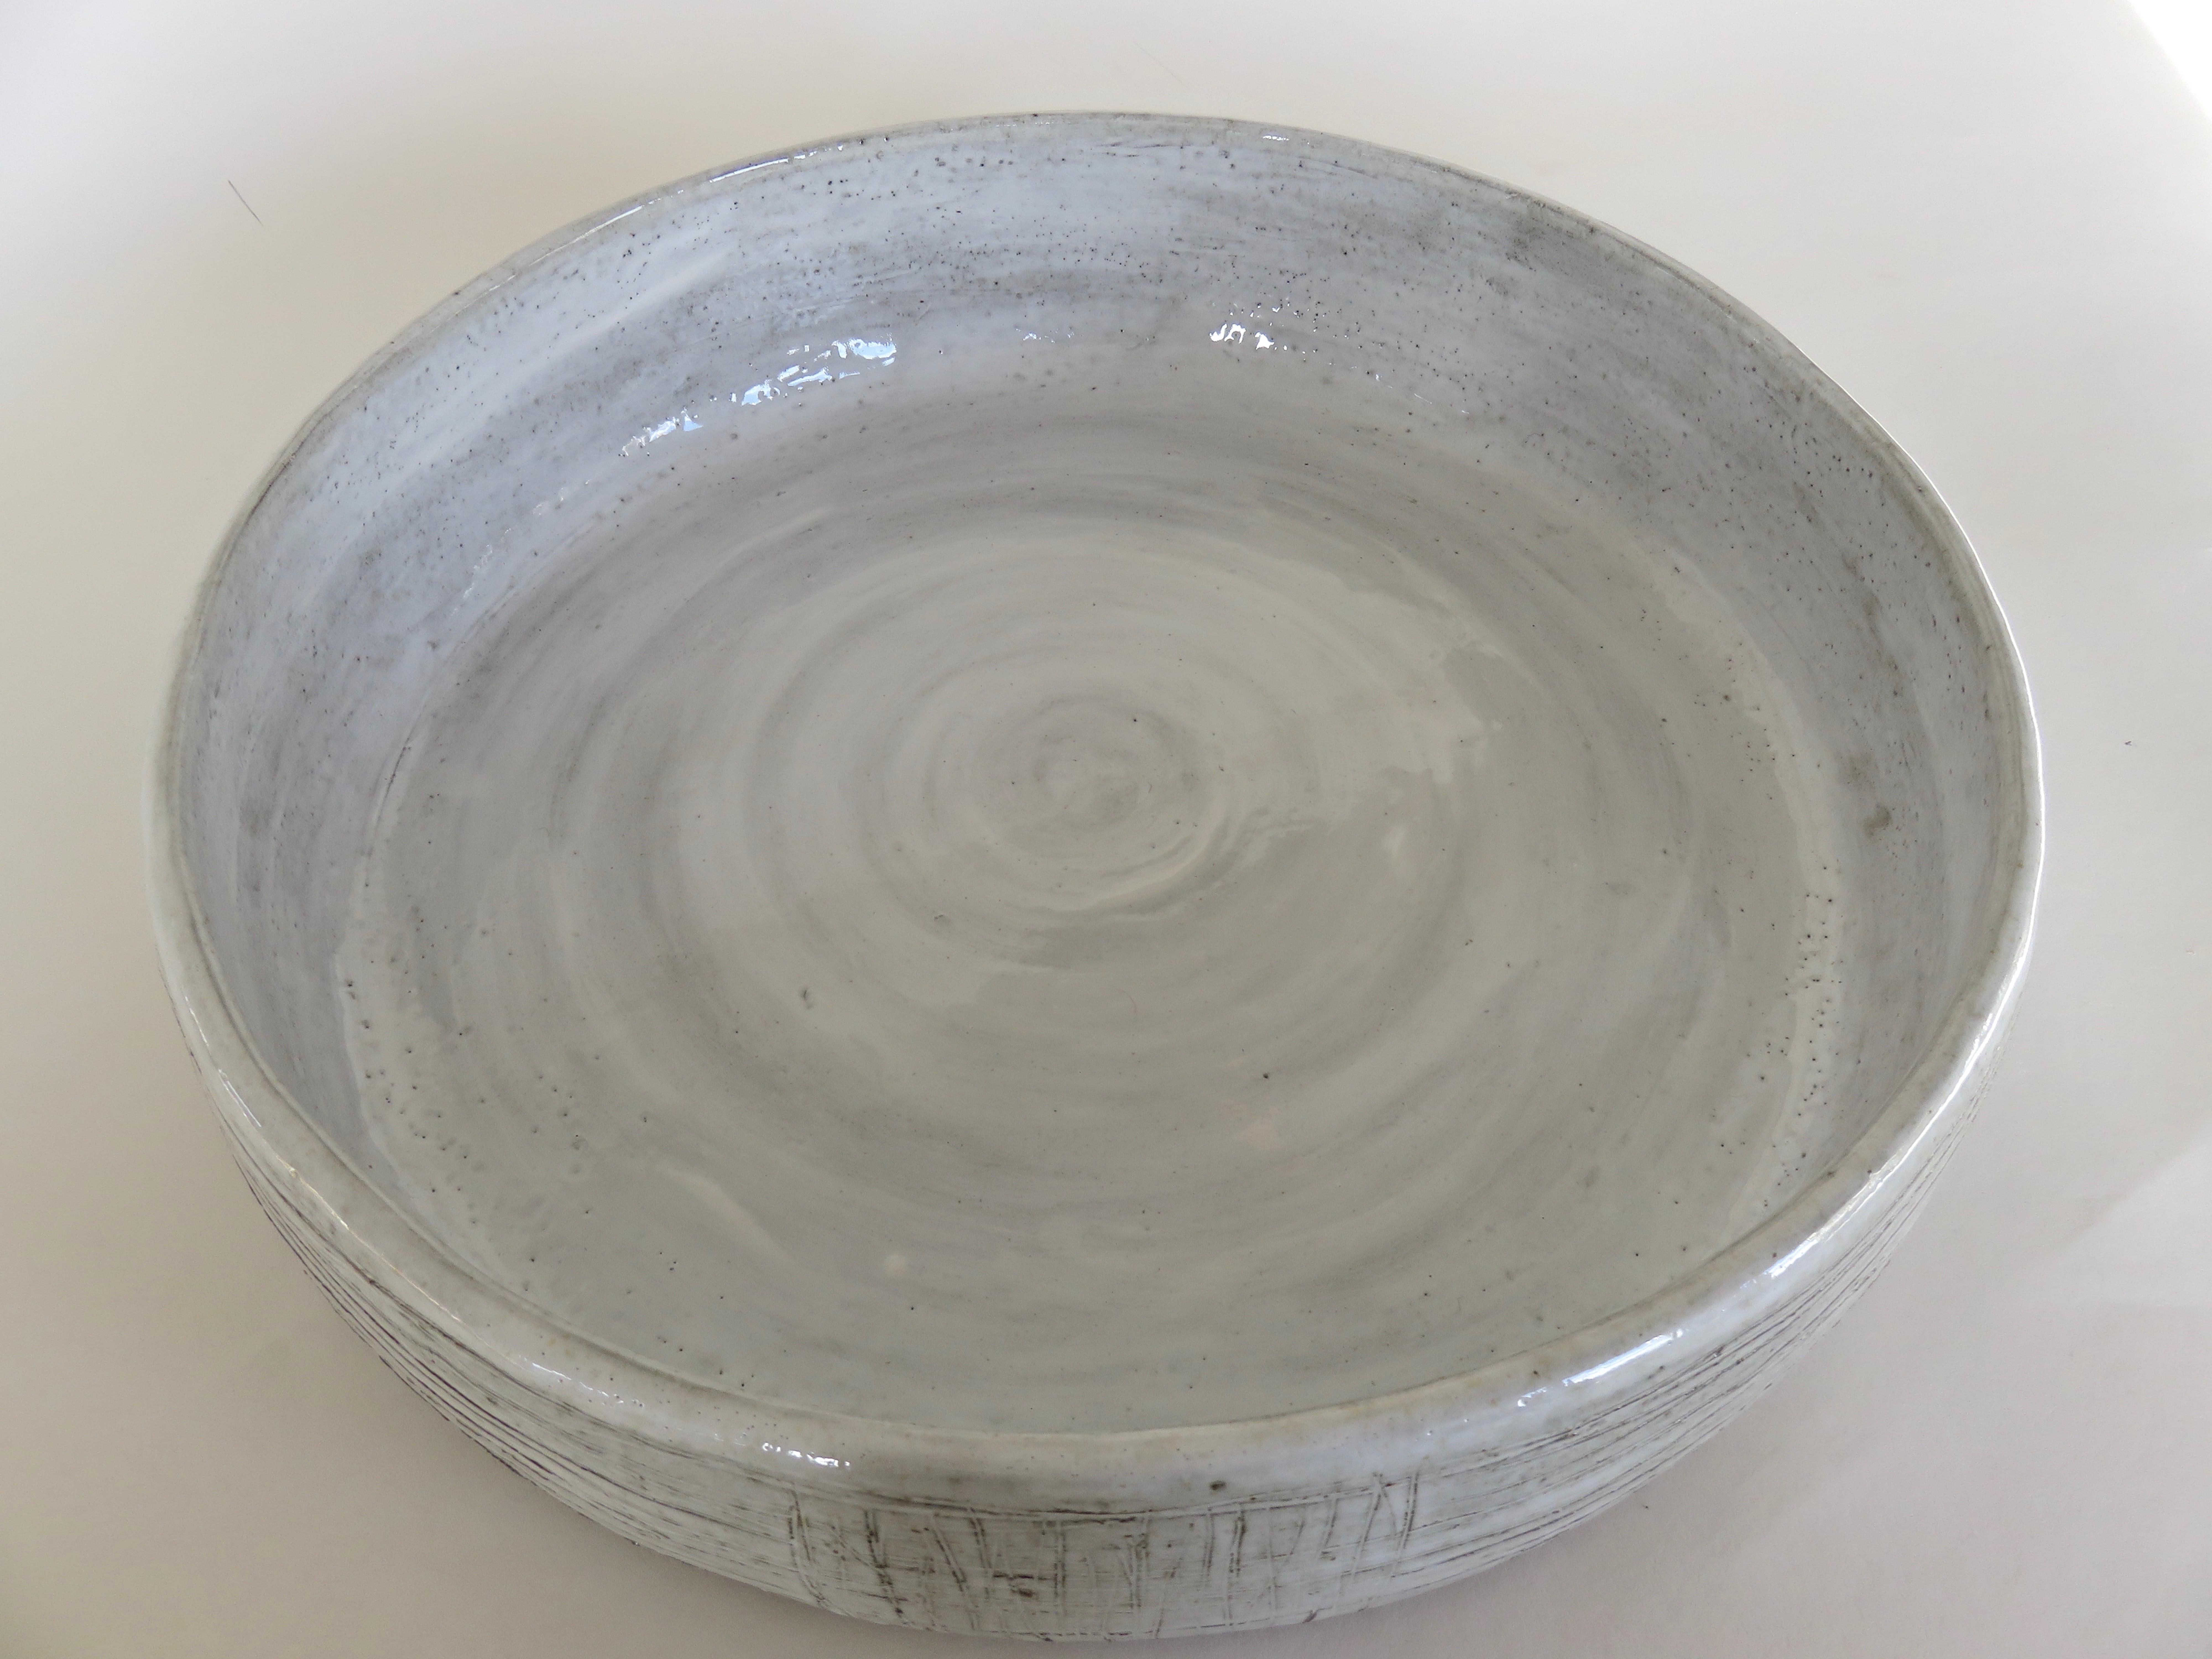 Contemporary Large Low Serving Bowl, Carved Exterior with White Glaze, Hand Built Ceramic